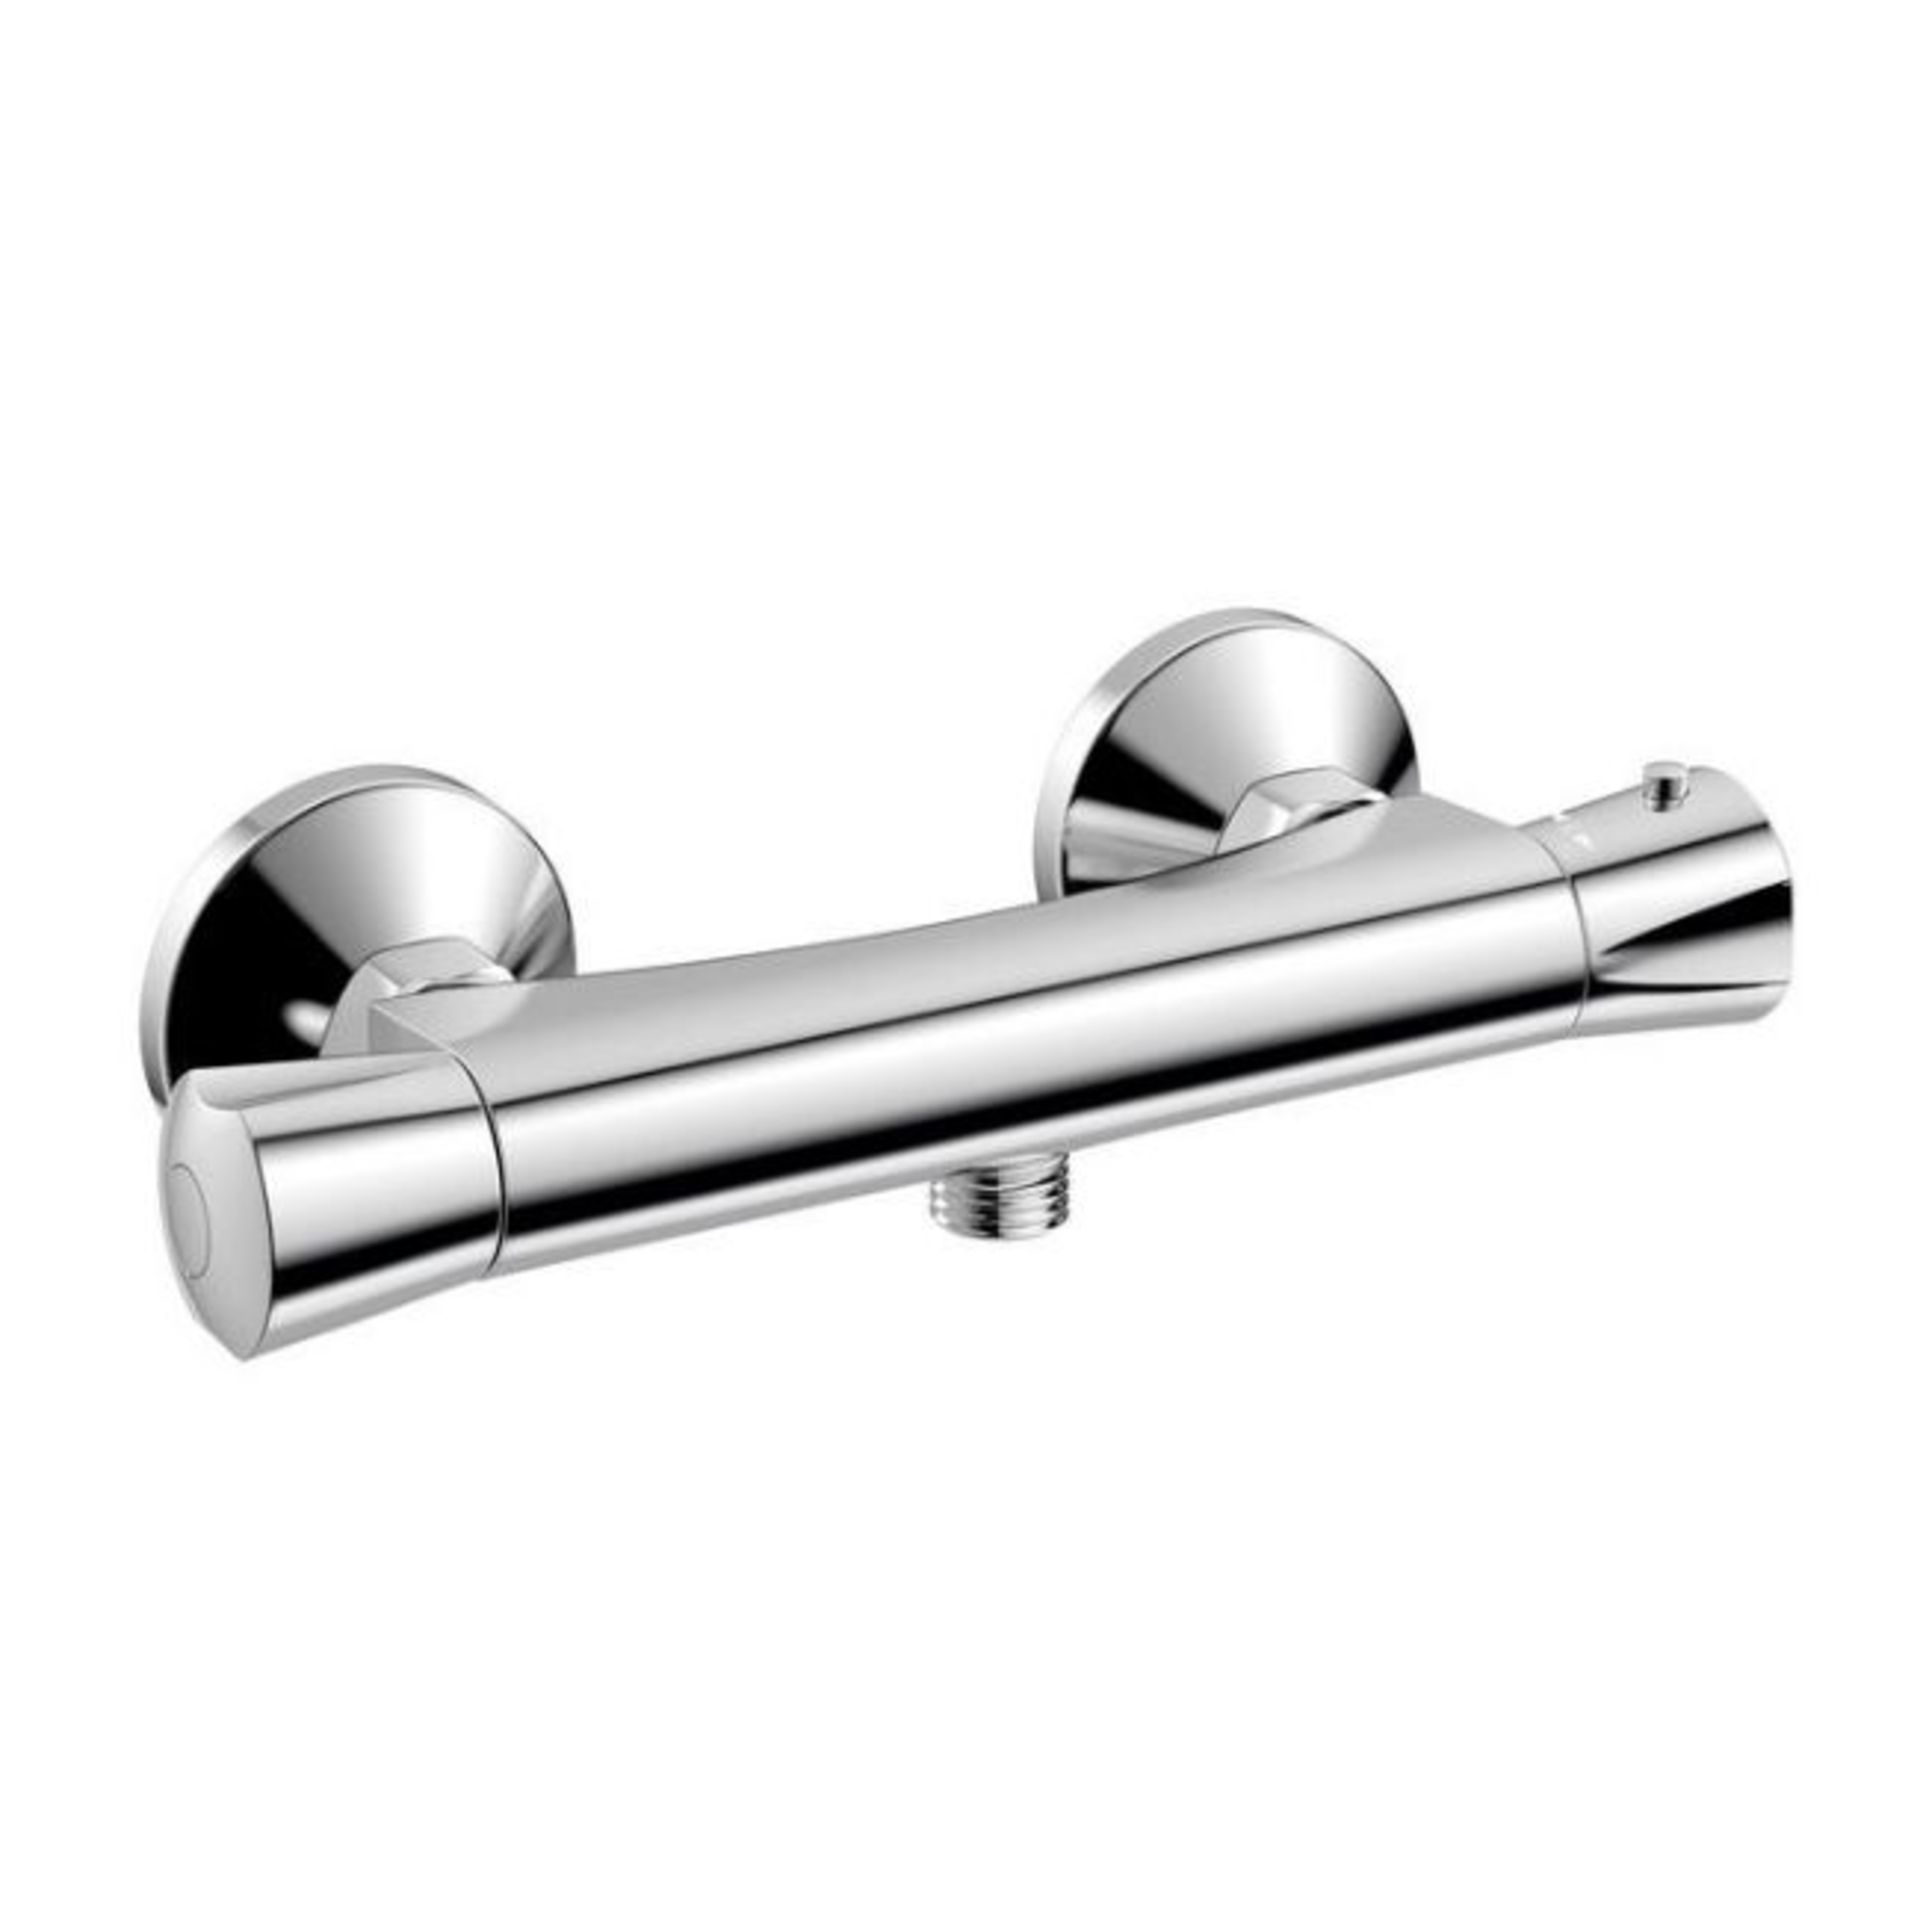 NEW (FF1013) Thermostatic Shower Valve - Round Bar Mixer Chrome plated solid brass mixer Cool t... - Image 2 of 2